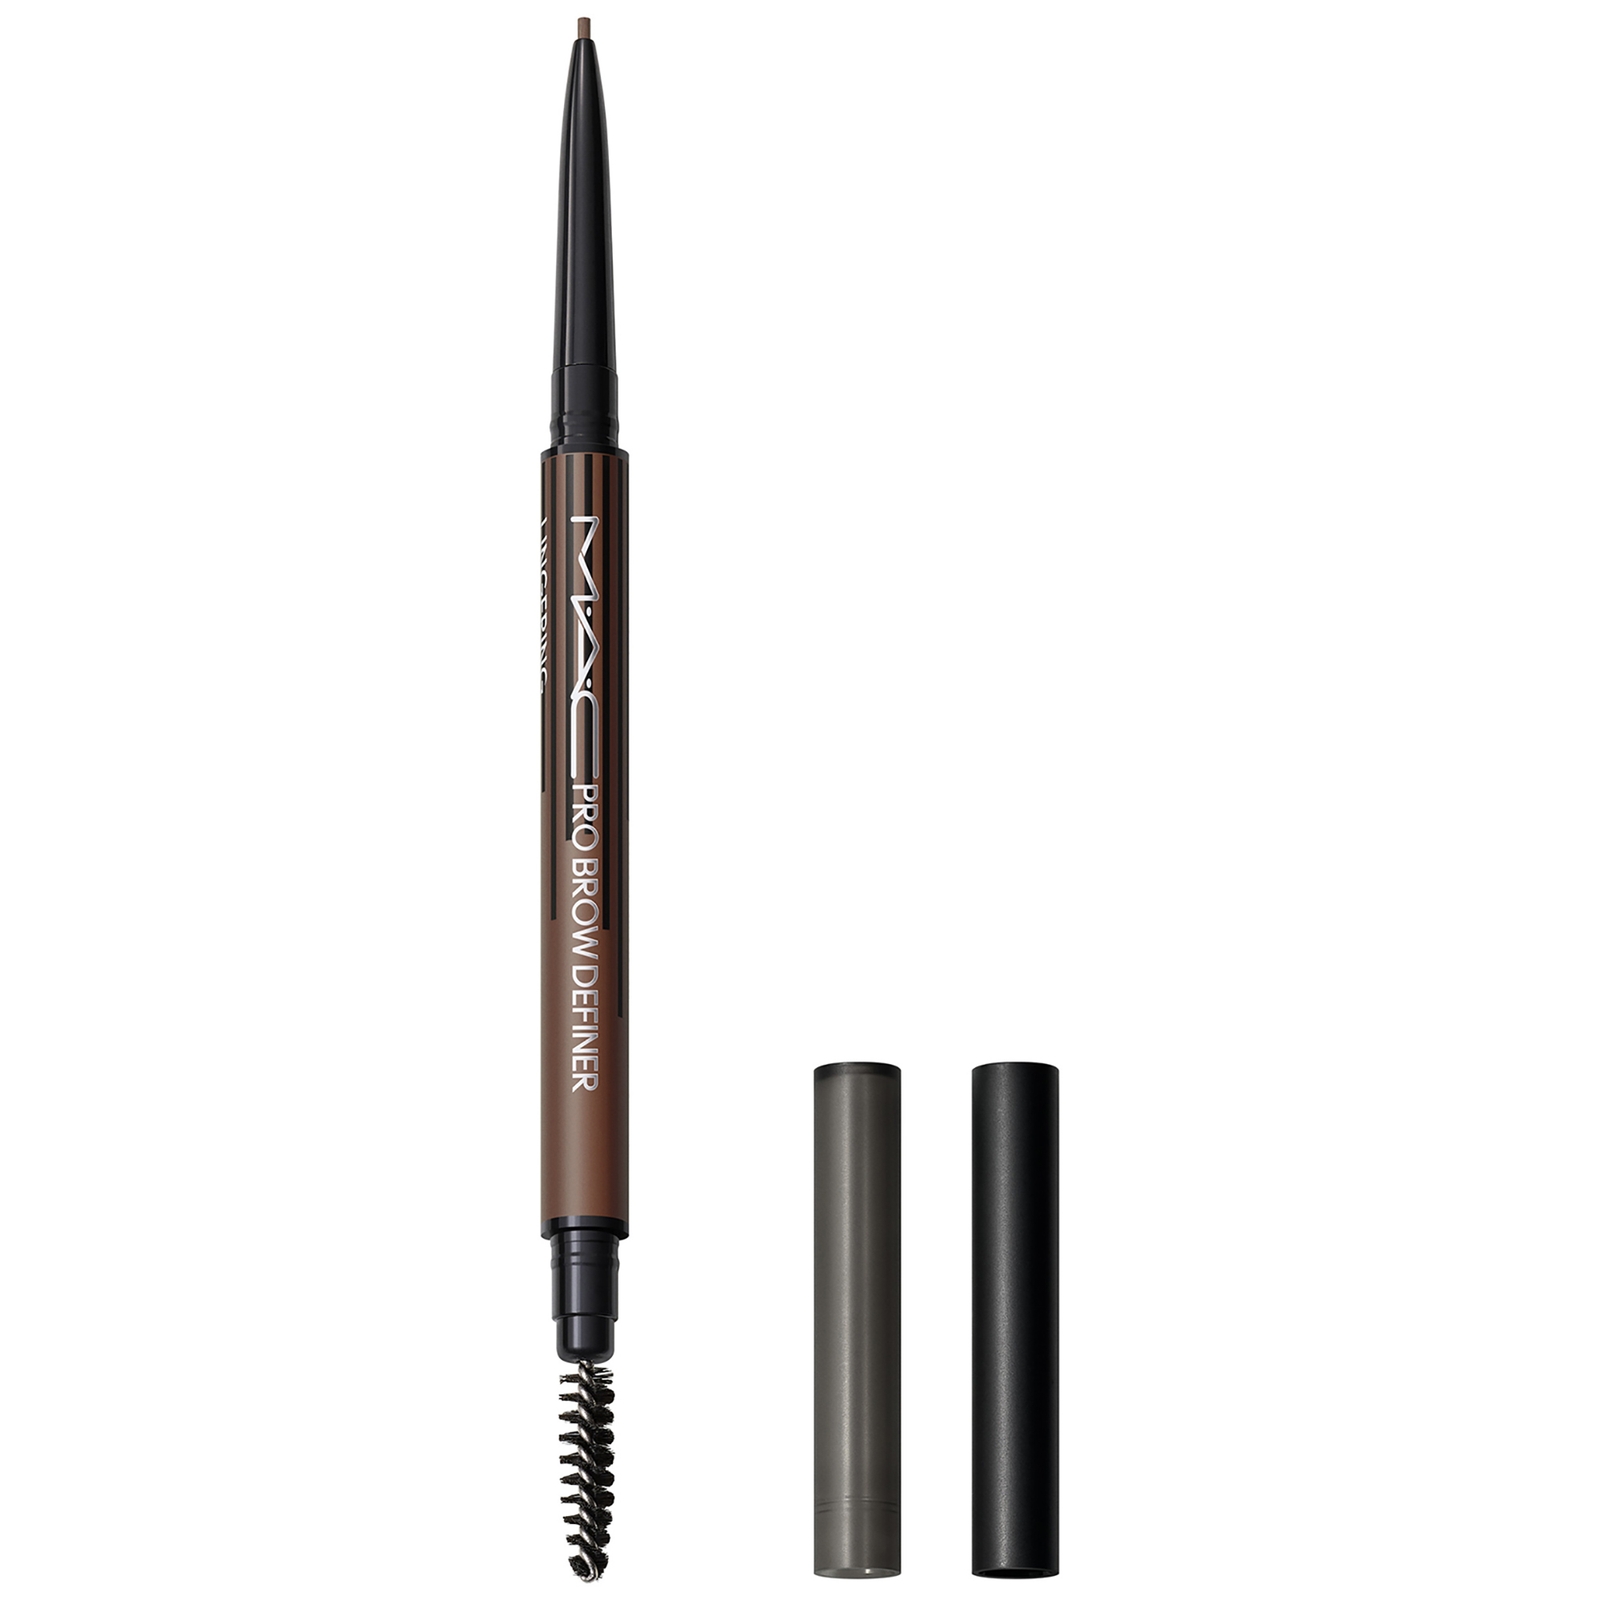 Mac Pro Brow Definer 1mm-tip Brow Pencil 5g (various Shades) - Lingering In White